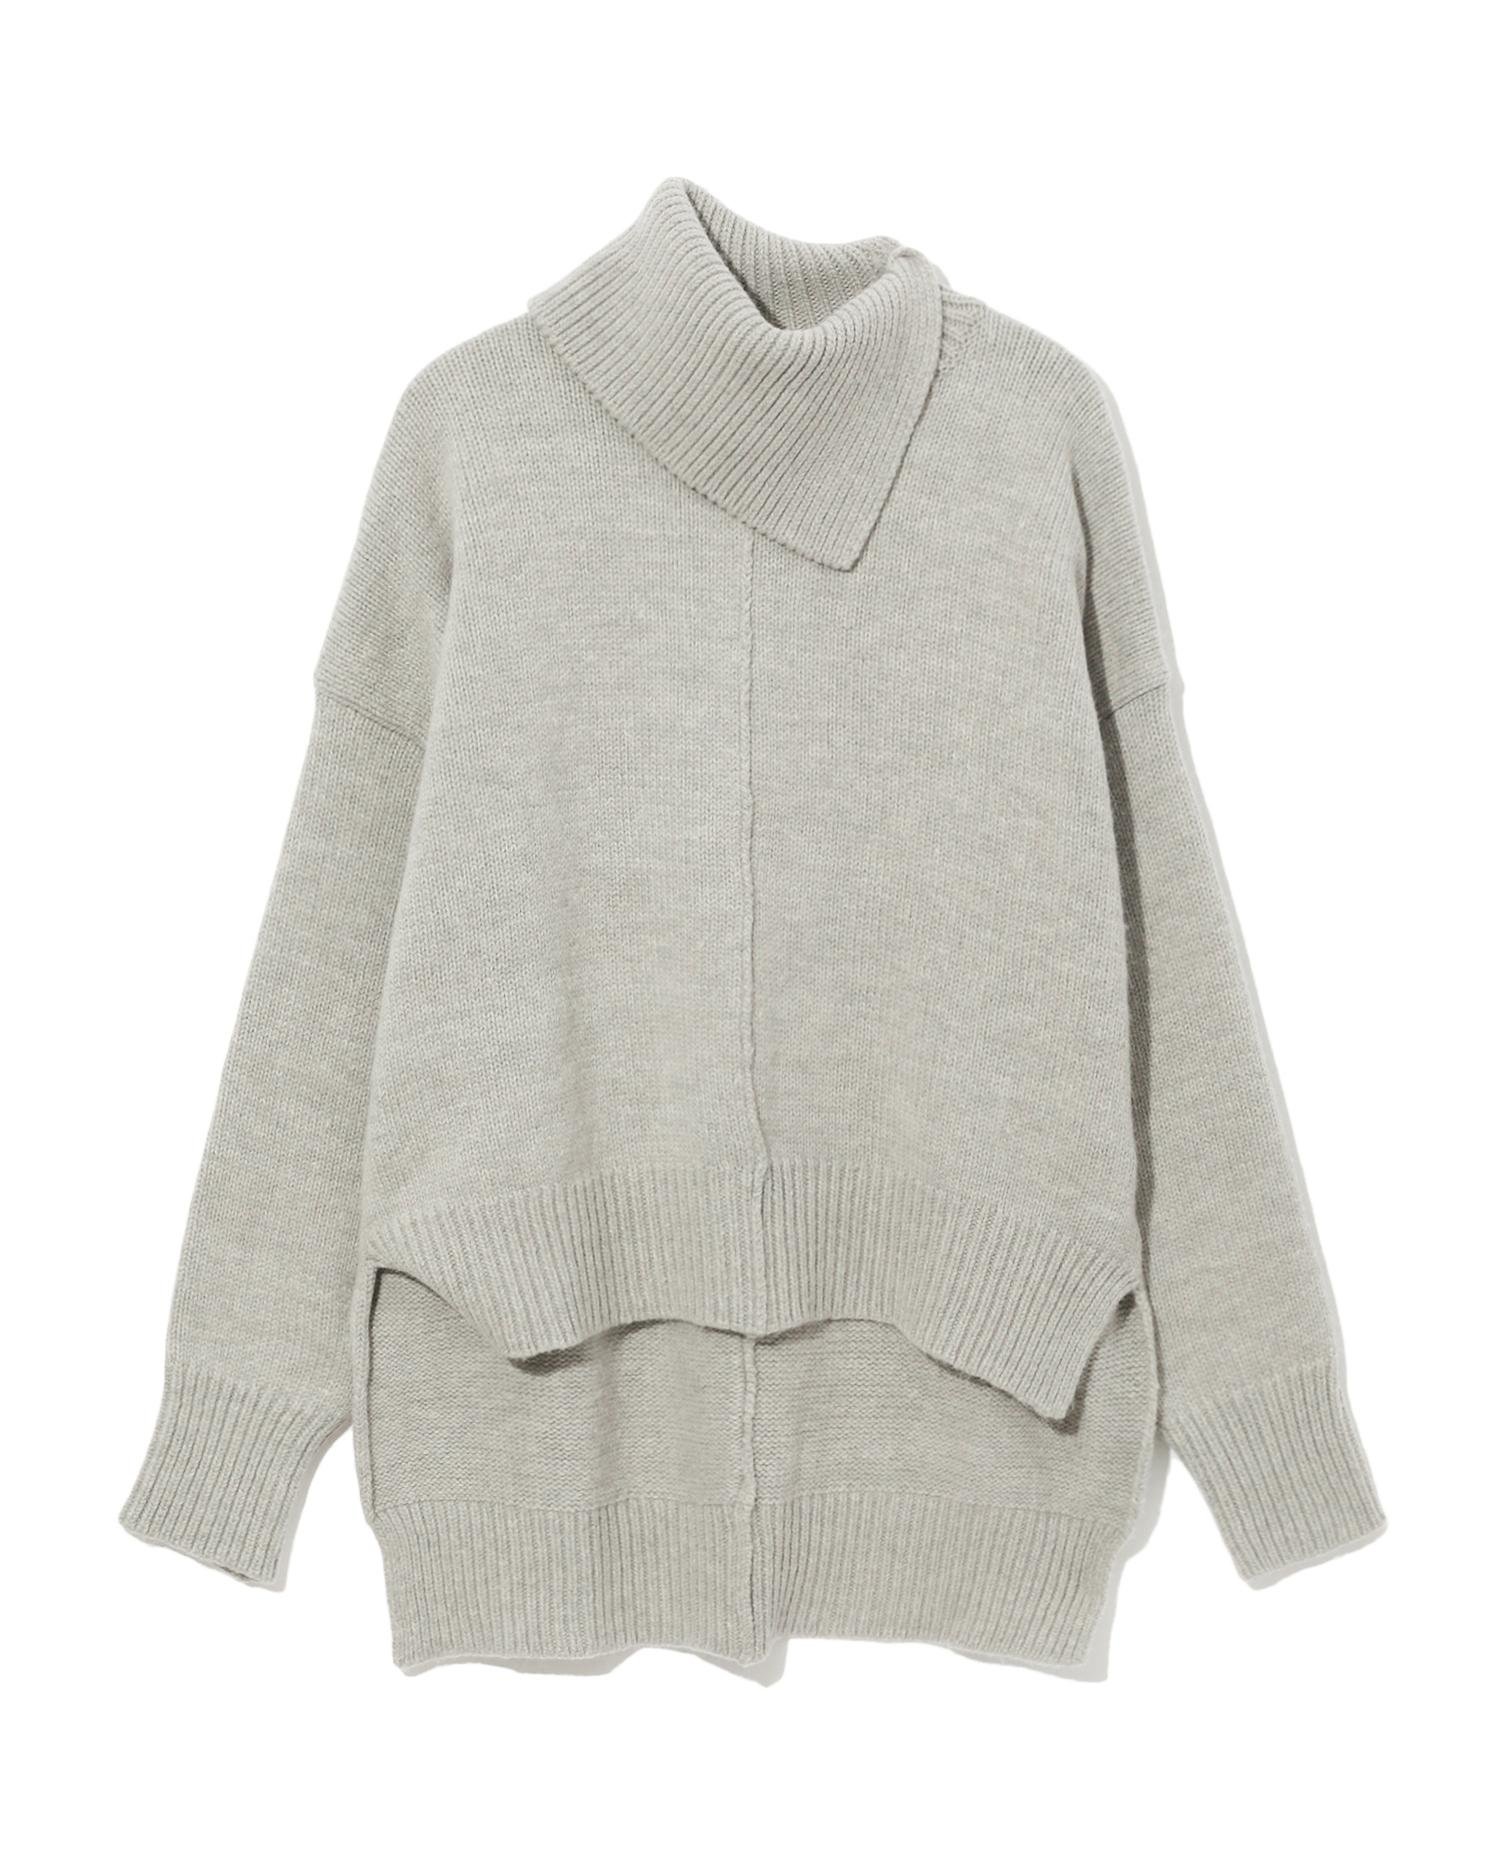 Fold-over collar wool sweater by D'DEMOO